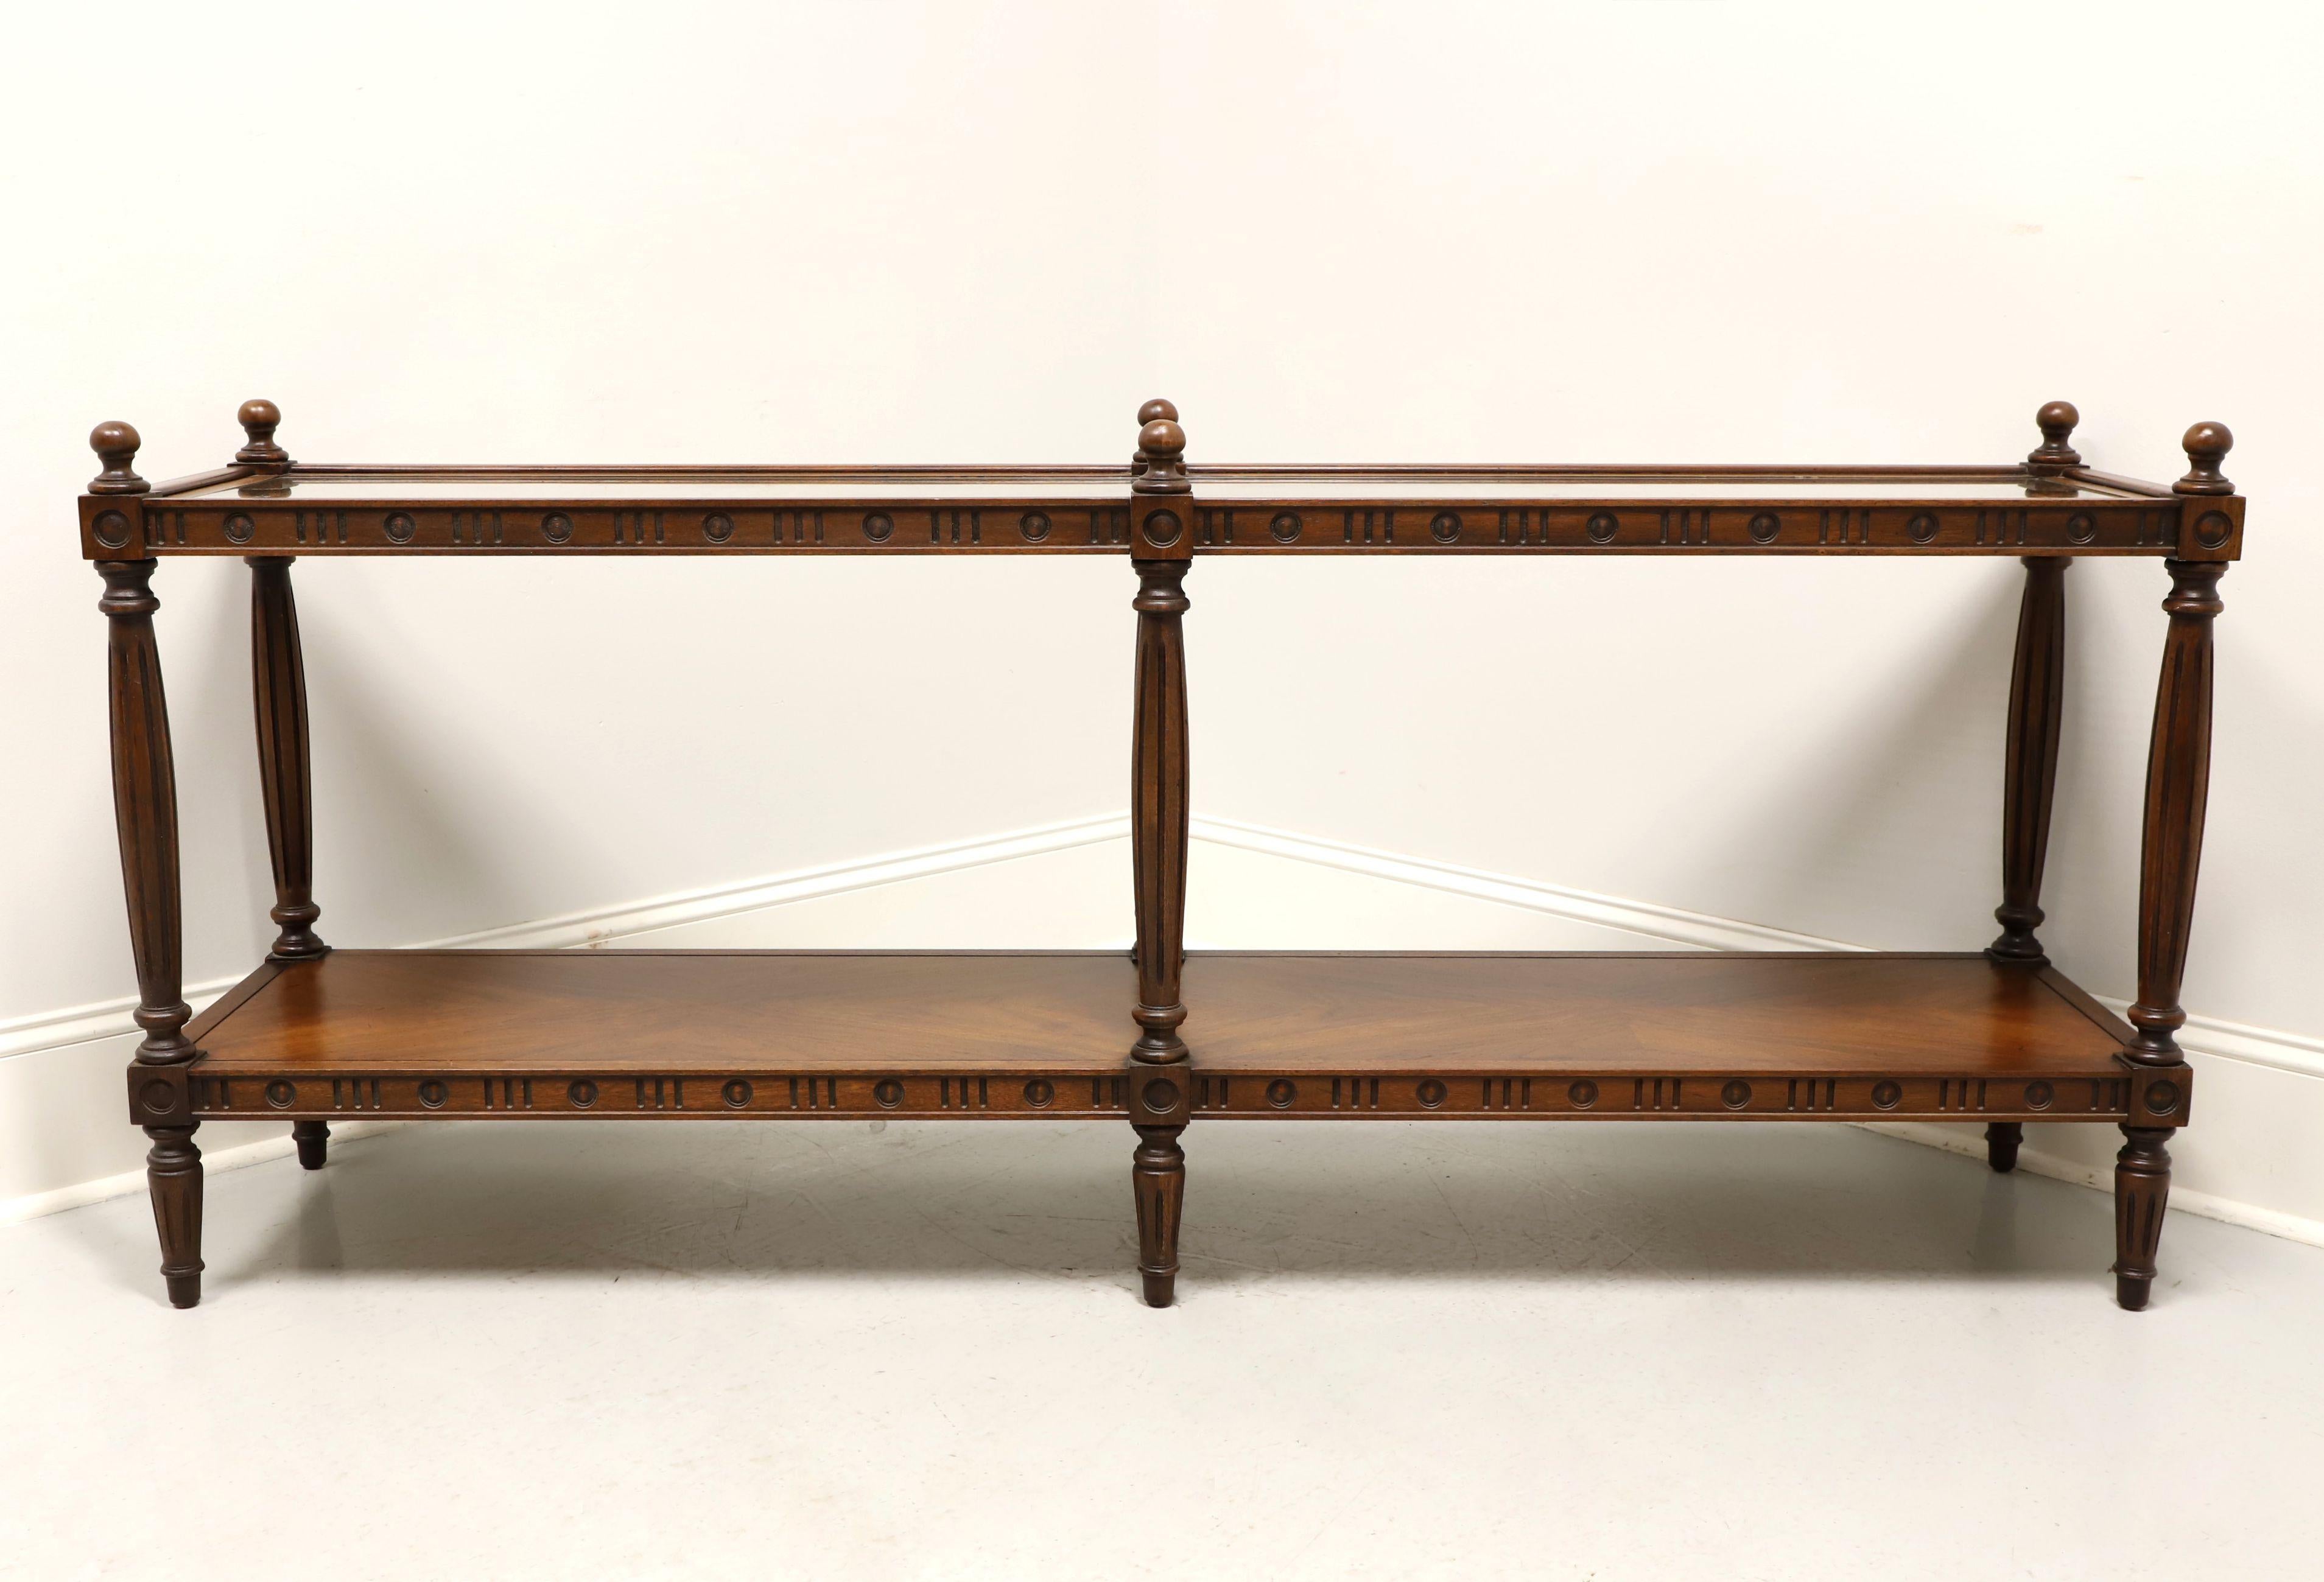 A Neoclassical style console table by Thomasville Furniture. Solid walnut, caned top with inserted glass coverings, finials capping the legs, carved aprons, lower tier shelf and round fluted legs. Made in North Carolina, USA, circa